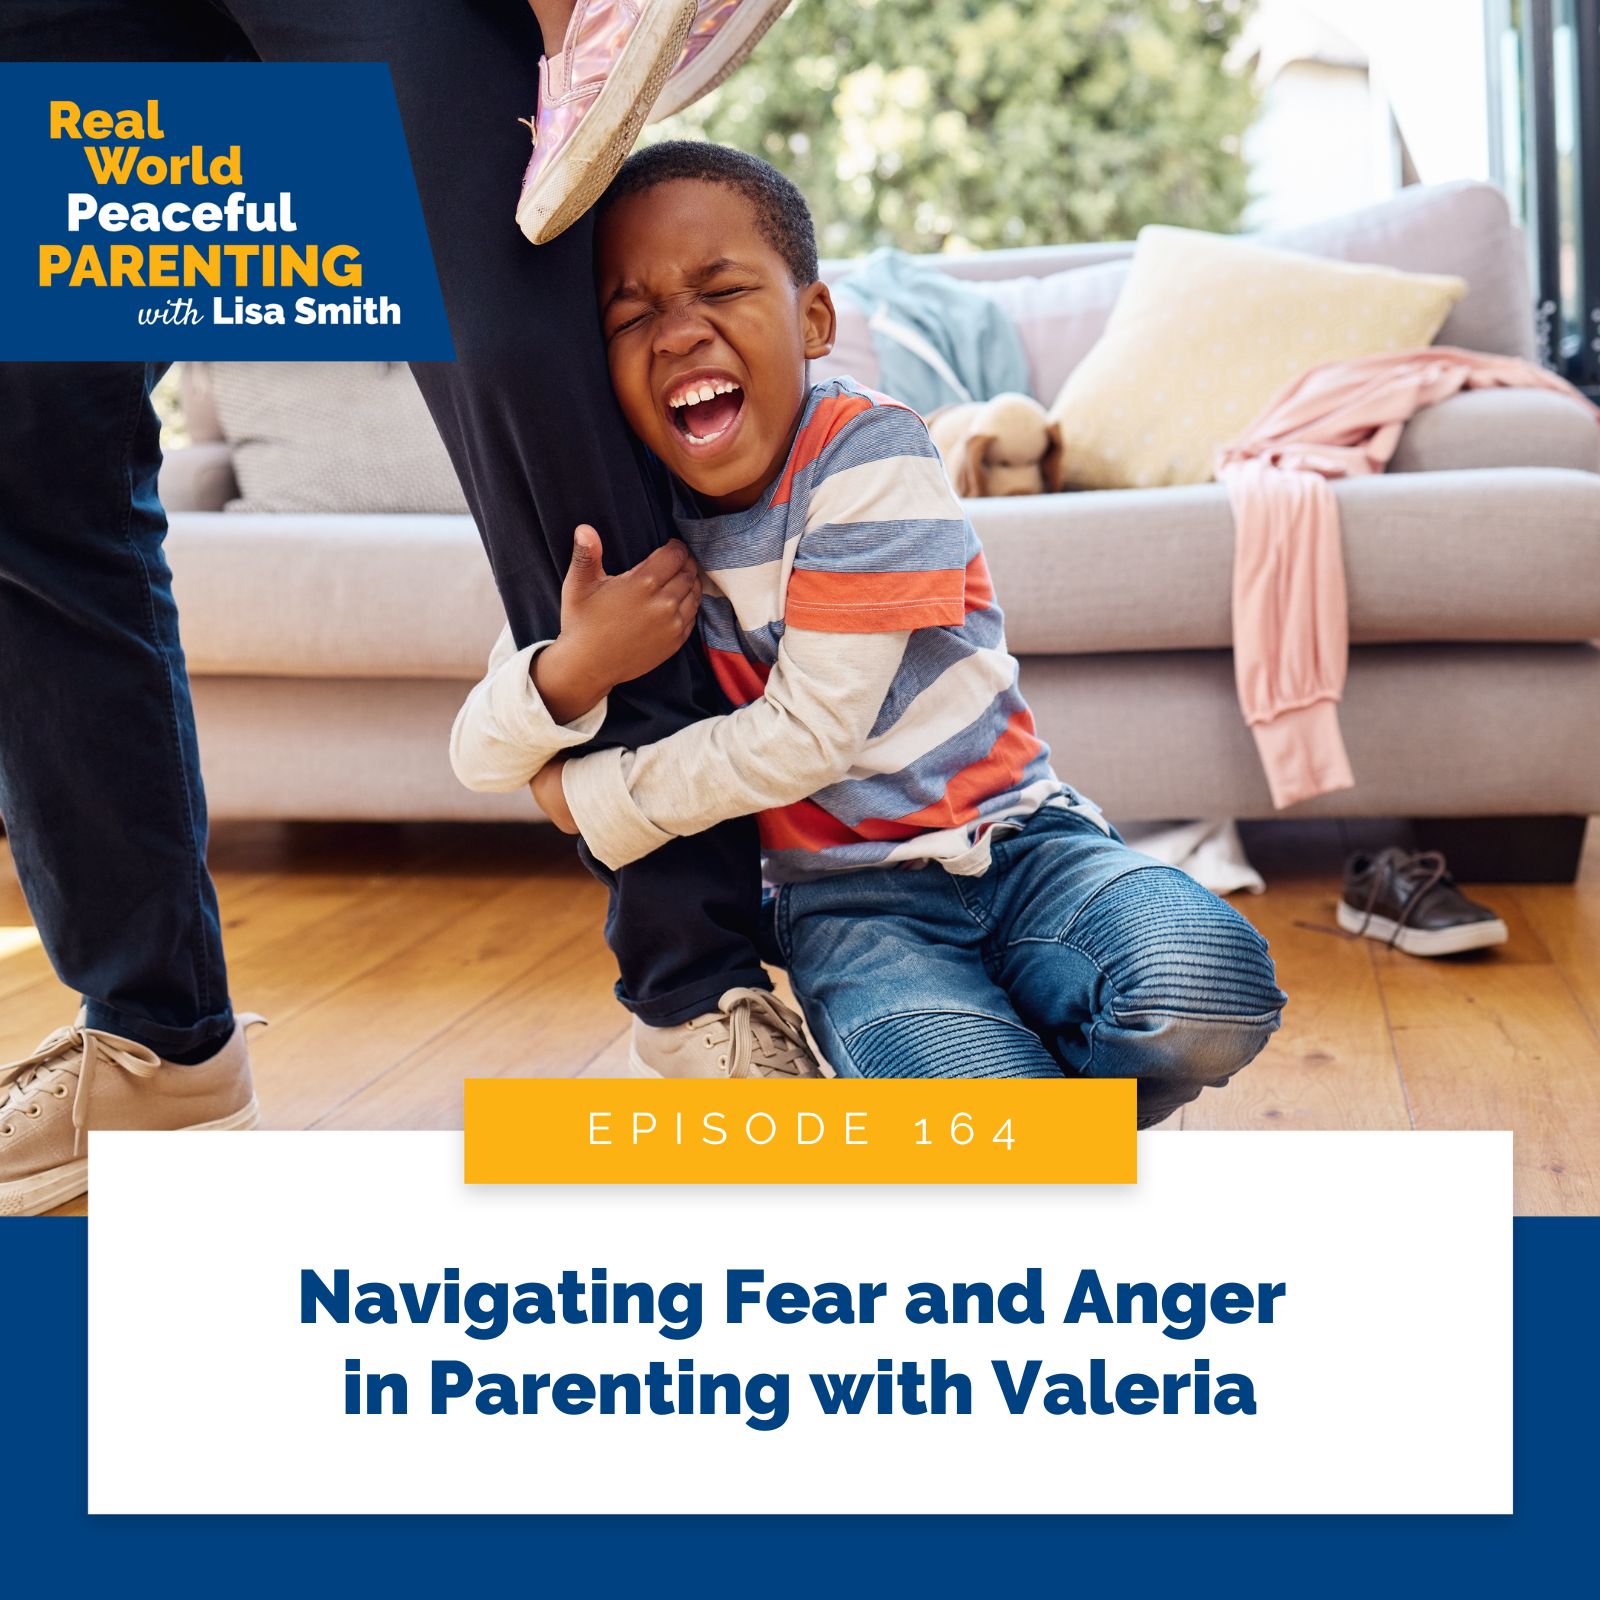 Real World Peaceful Parenting with Lisa Smith | Navigating Fear and Anger in Parenting with Valeria